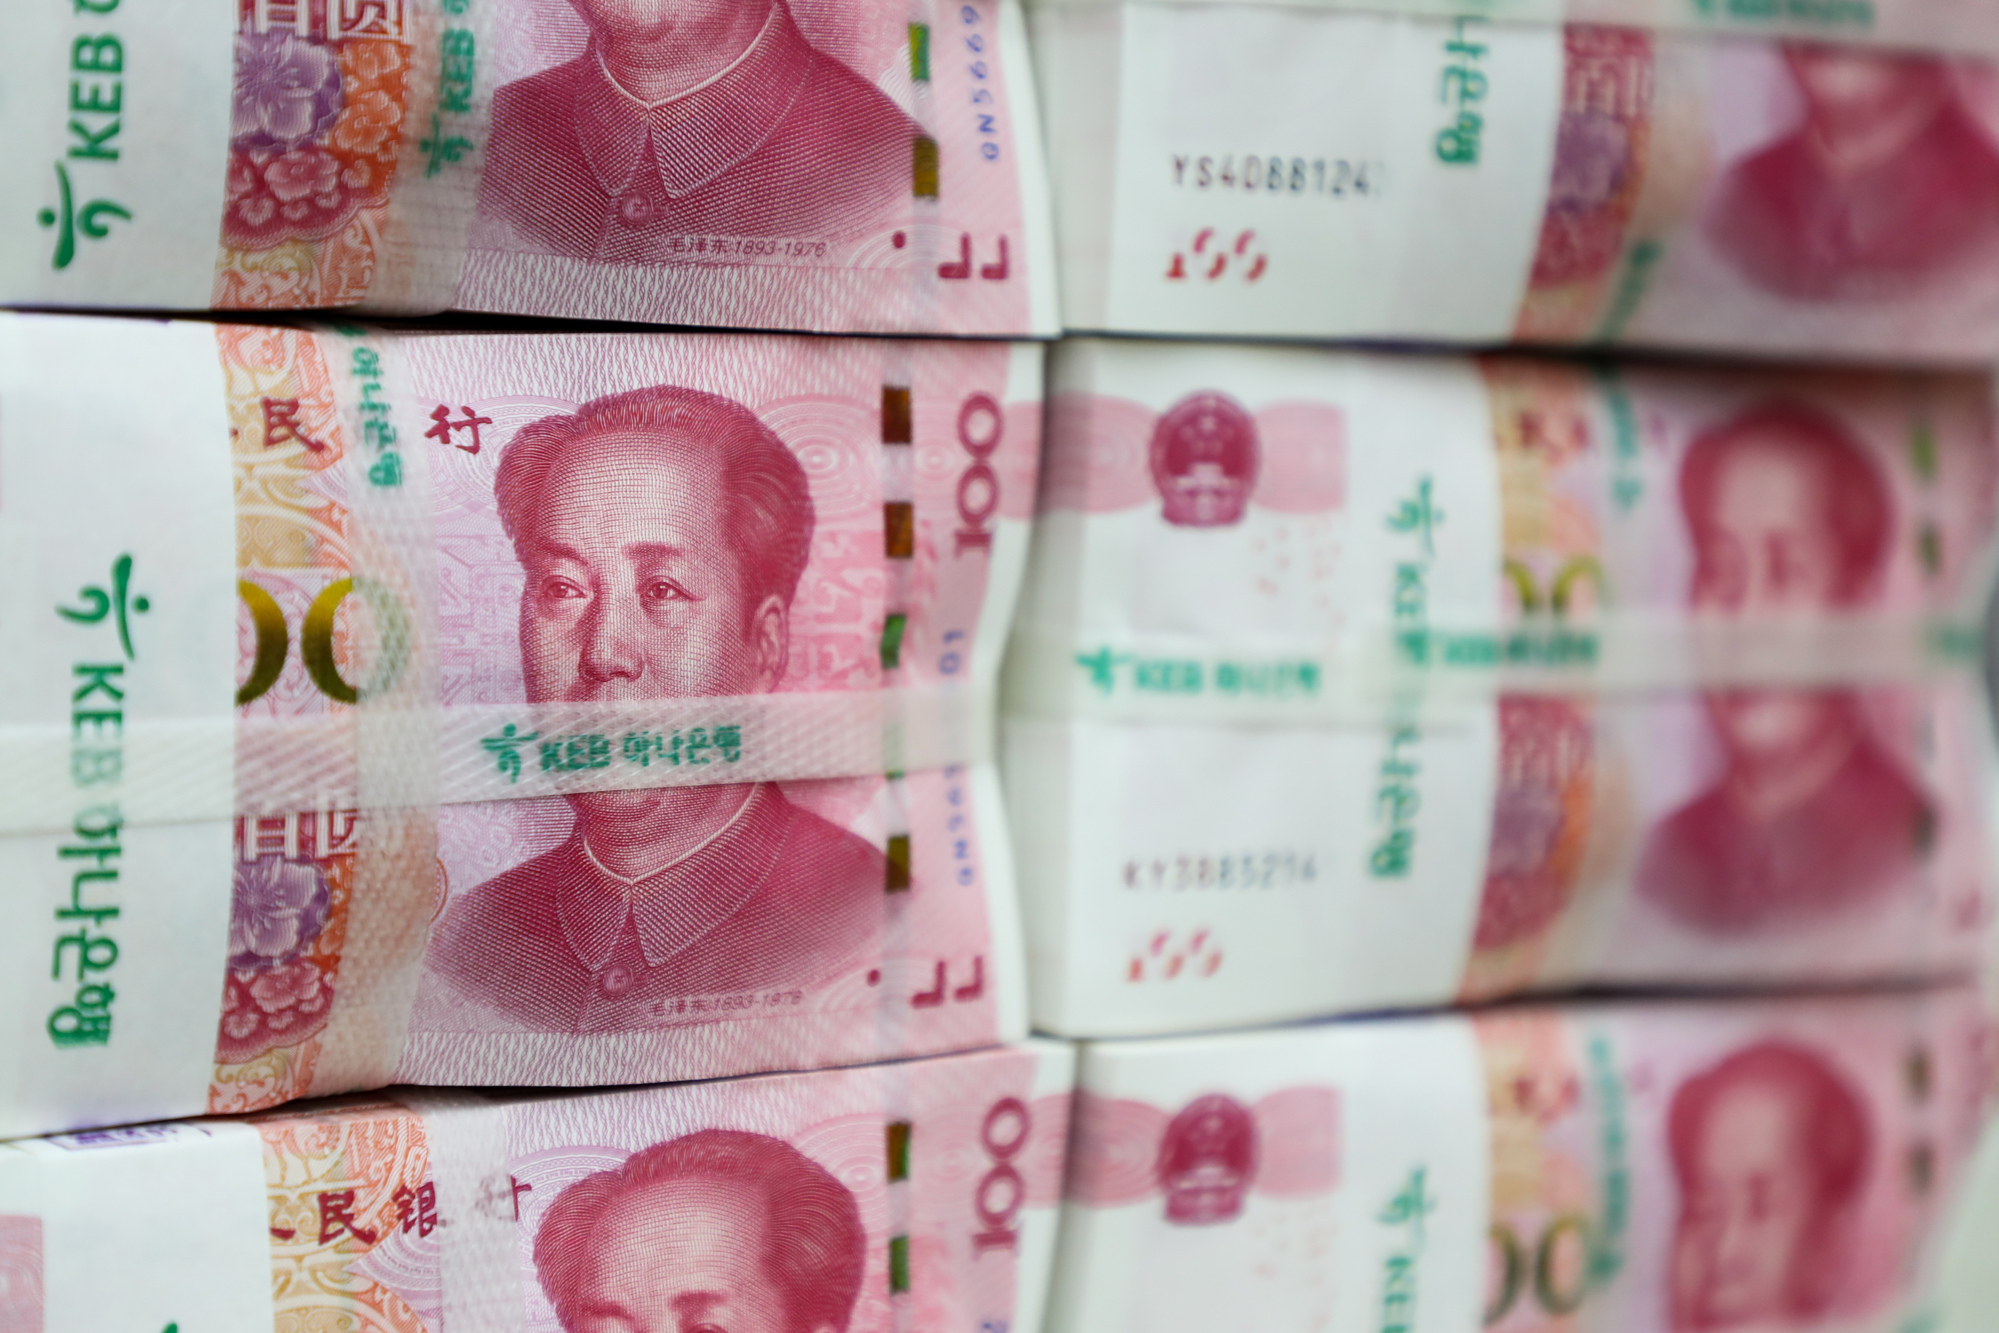 Global Reflation Trade Gains New Momentum From China's Yuan